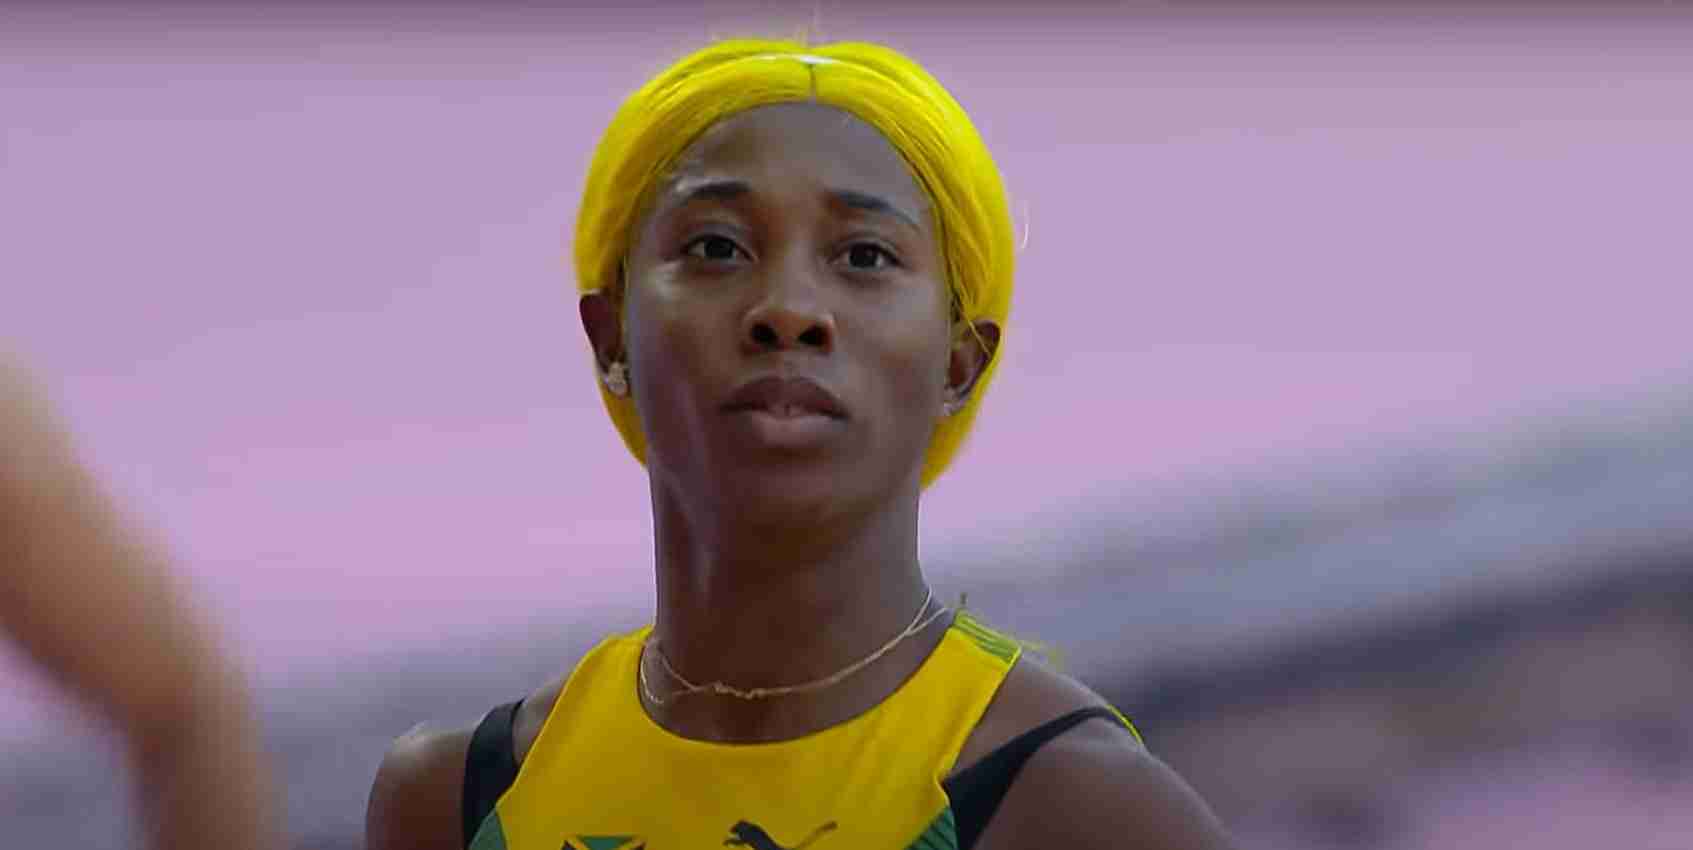 Fraser-Pryce opens season with 23.19 secs 200m win at Velocity Fest 8 meet